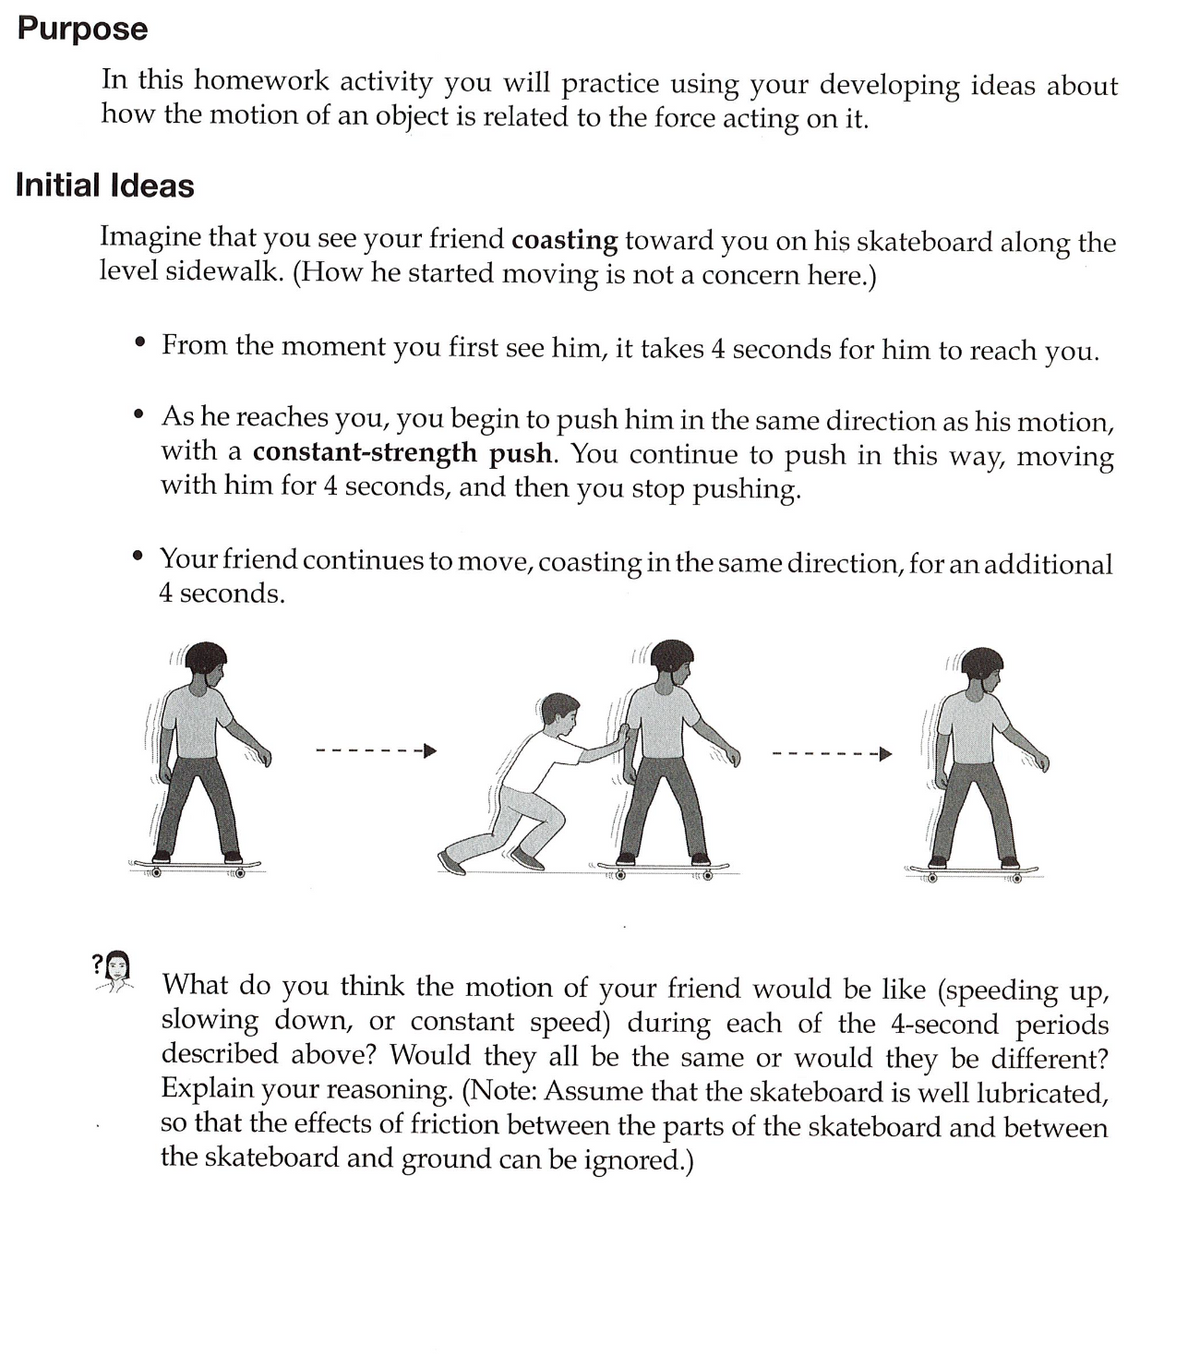 Purpose
In this homework activity you will practice using your developing ideas about
how the motion of an object is related to the force acting on it.
Initial Ideas
Imagine that you see your friend coasting toward you on his skateboard along the
level sidewalk. (How he started moving is not a concern here.)
• From the moment you first see him, it takes 4 seconds for him to reach you.
• As he reaches you, you begin to push him in the same direction as his motion,
with a constant-strength push. You continue to push in this way, moving
with him for 4 seconds, and then you stop pushing.
• Your friend continues to move, coasting in the same direction, for an additional
4 seconds.
ill
What do you think the motion of your friend would be like (speeding up,
slowing down, or constant speed) during each of the 4-second periods
described above? Would they all be the same or would they be different?
Explain your reasoning. (Note: ASsume that the skateboard is well lubricated,
so that the effects of friction between the parts of the skateboard and between
the skateboard and ground can be ignored.)
